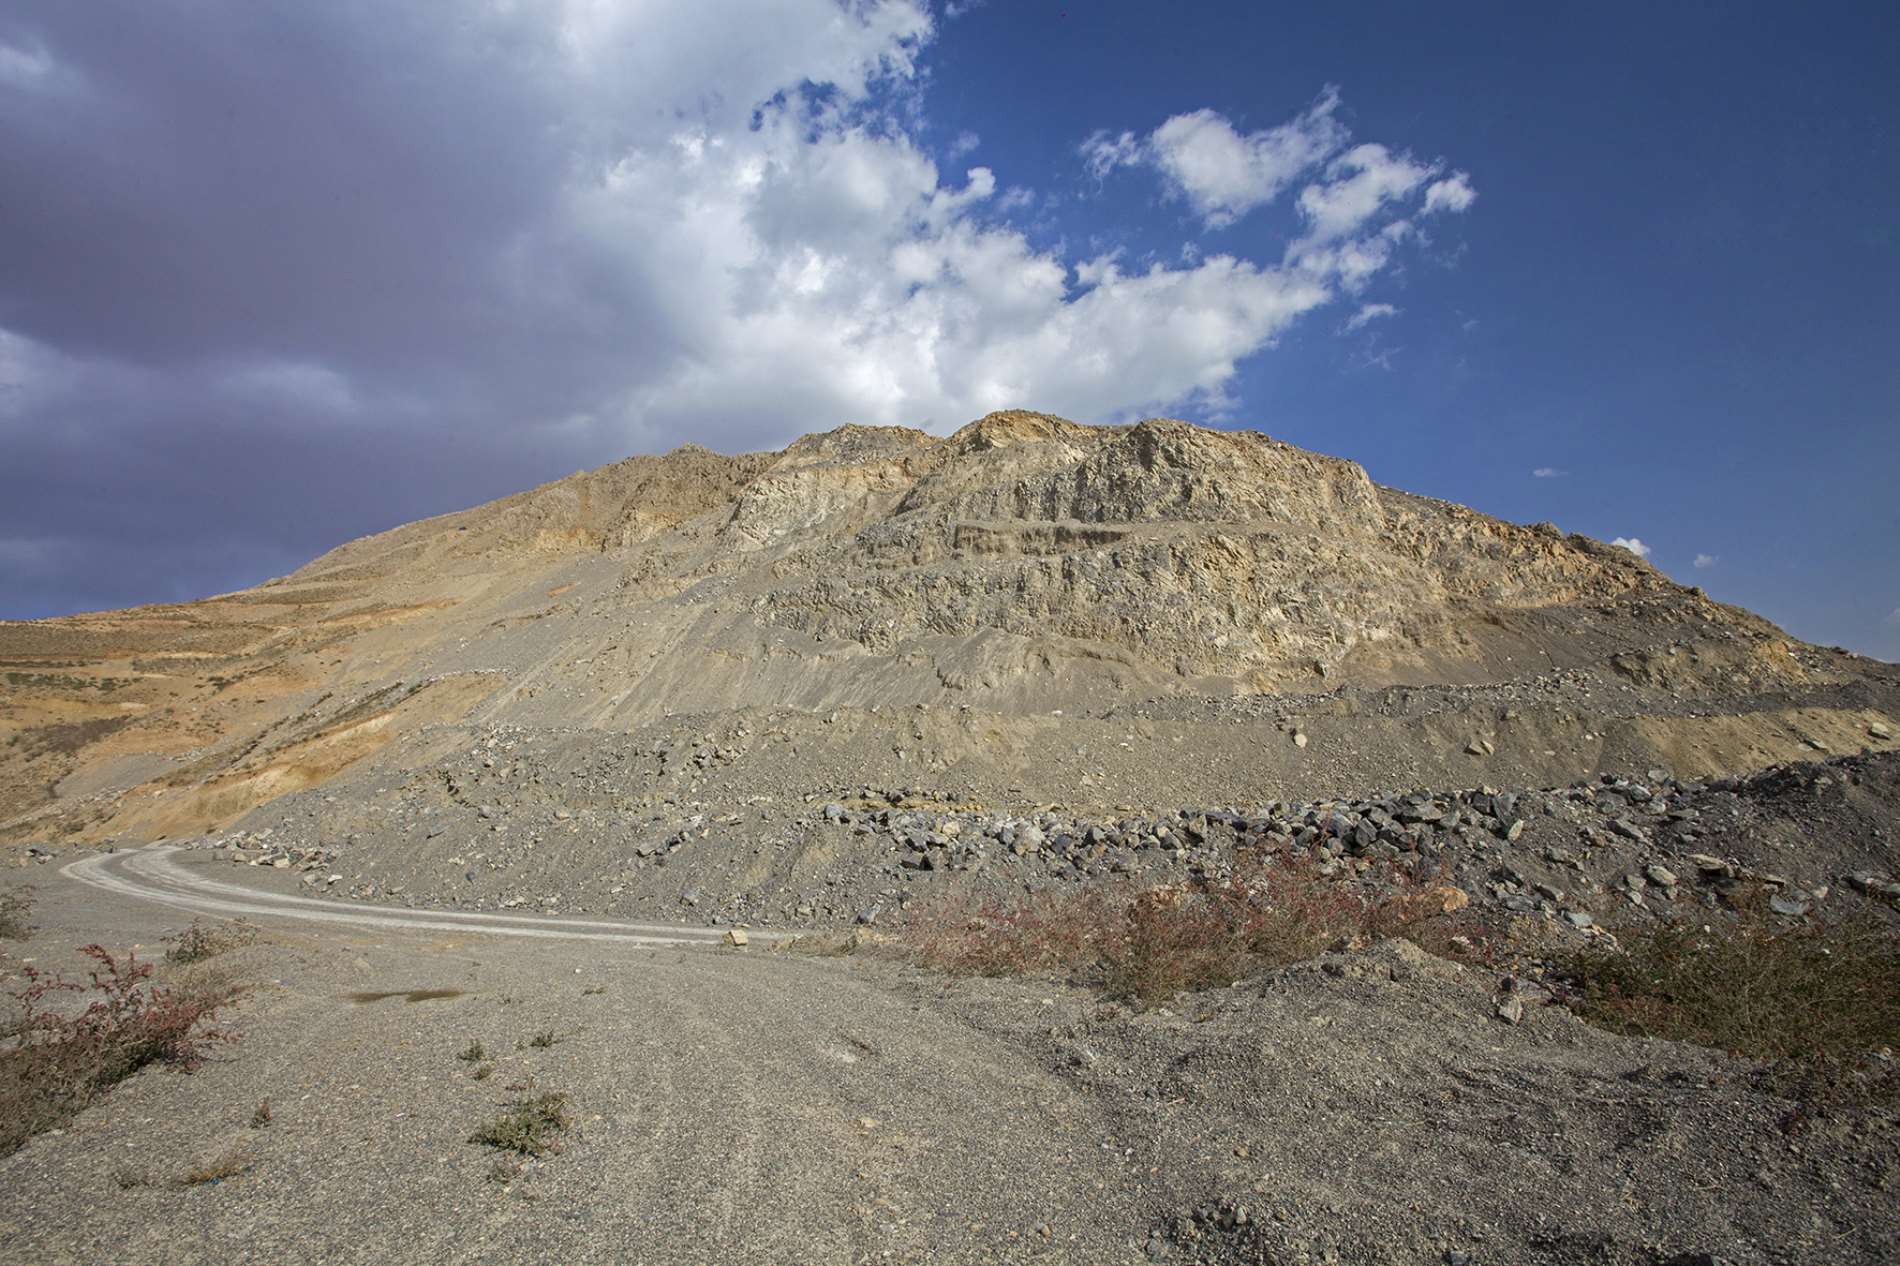 Crushed sand & gravel extracted from mountainous explosive mines